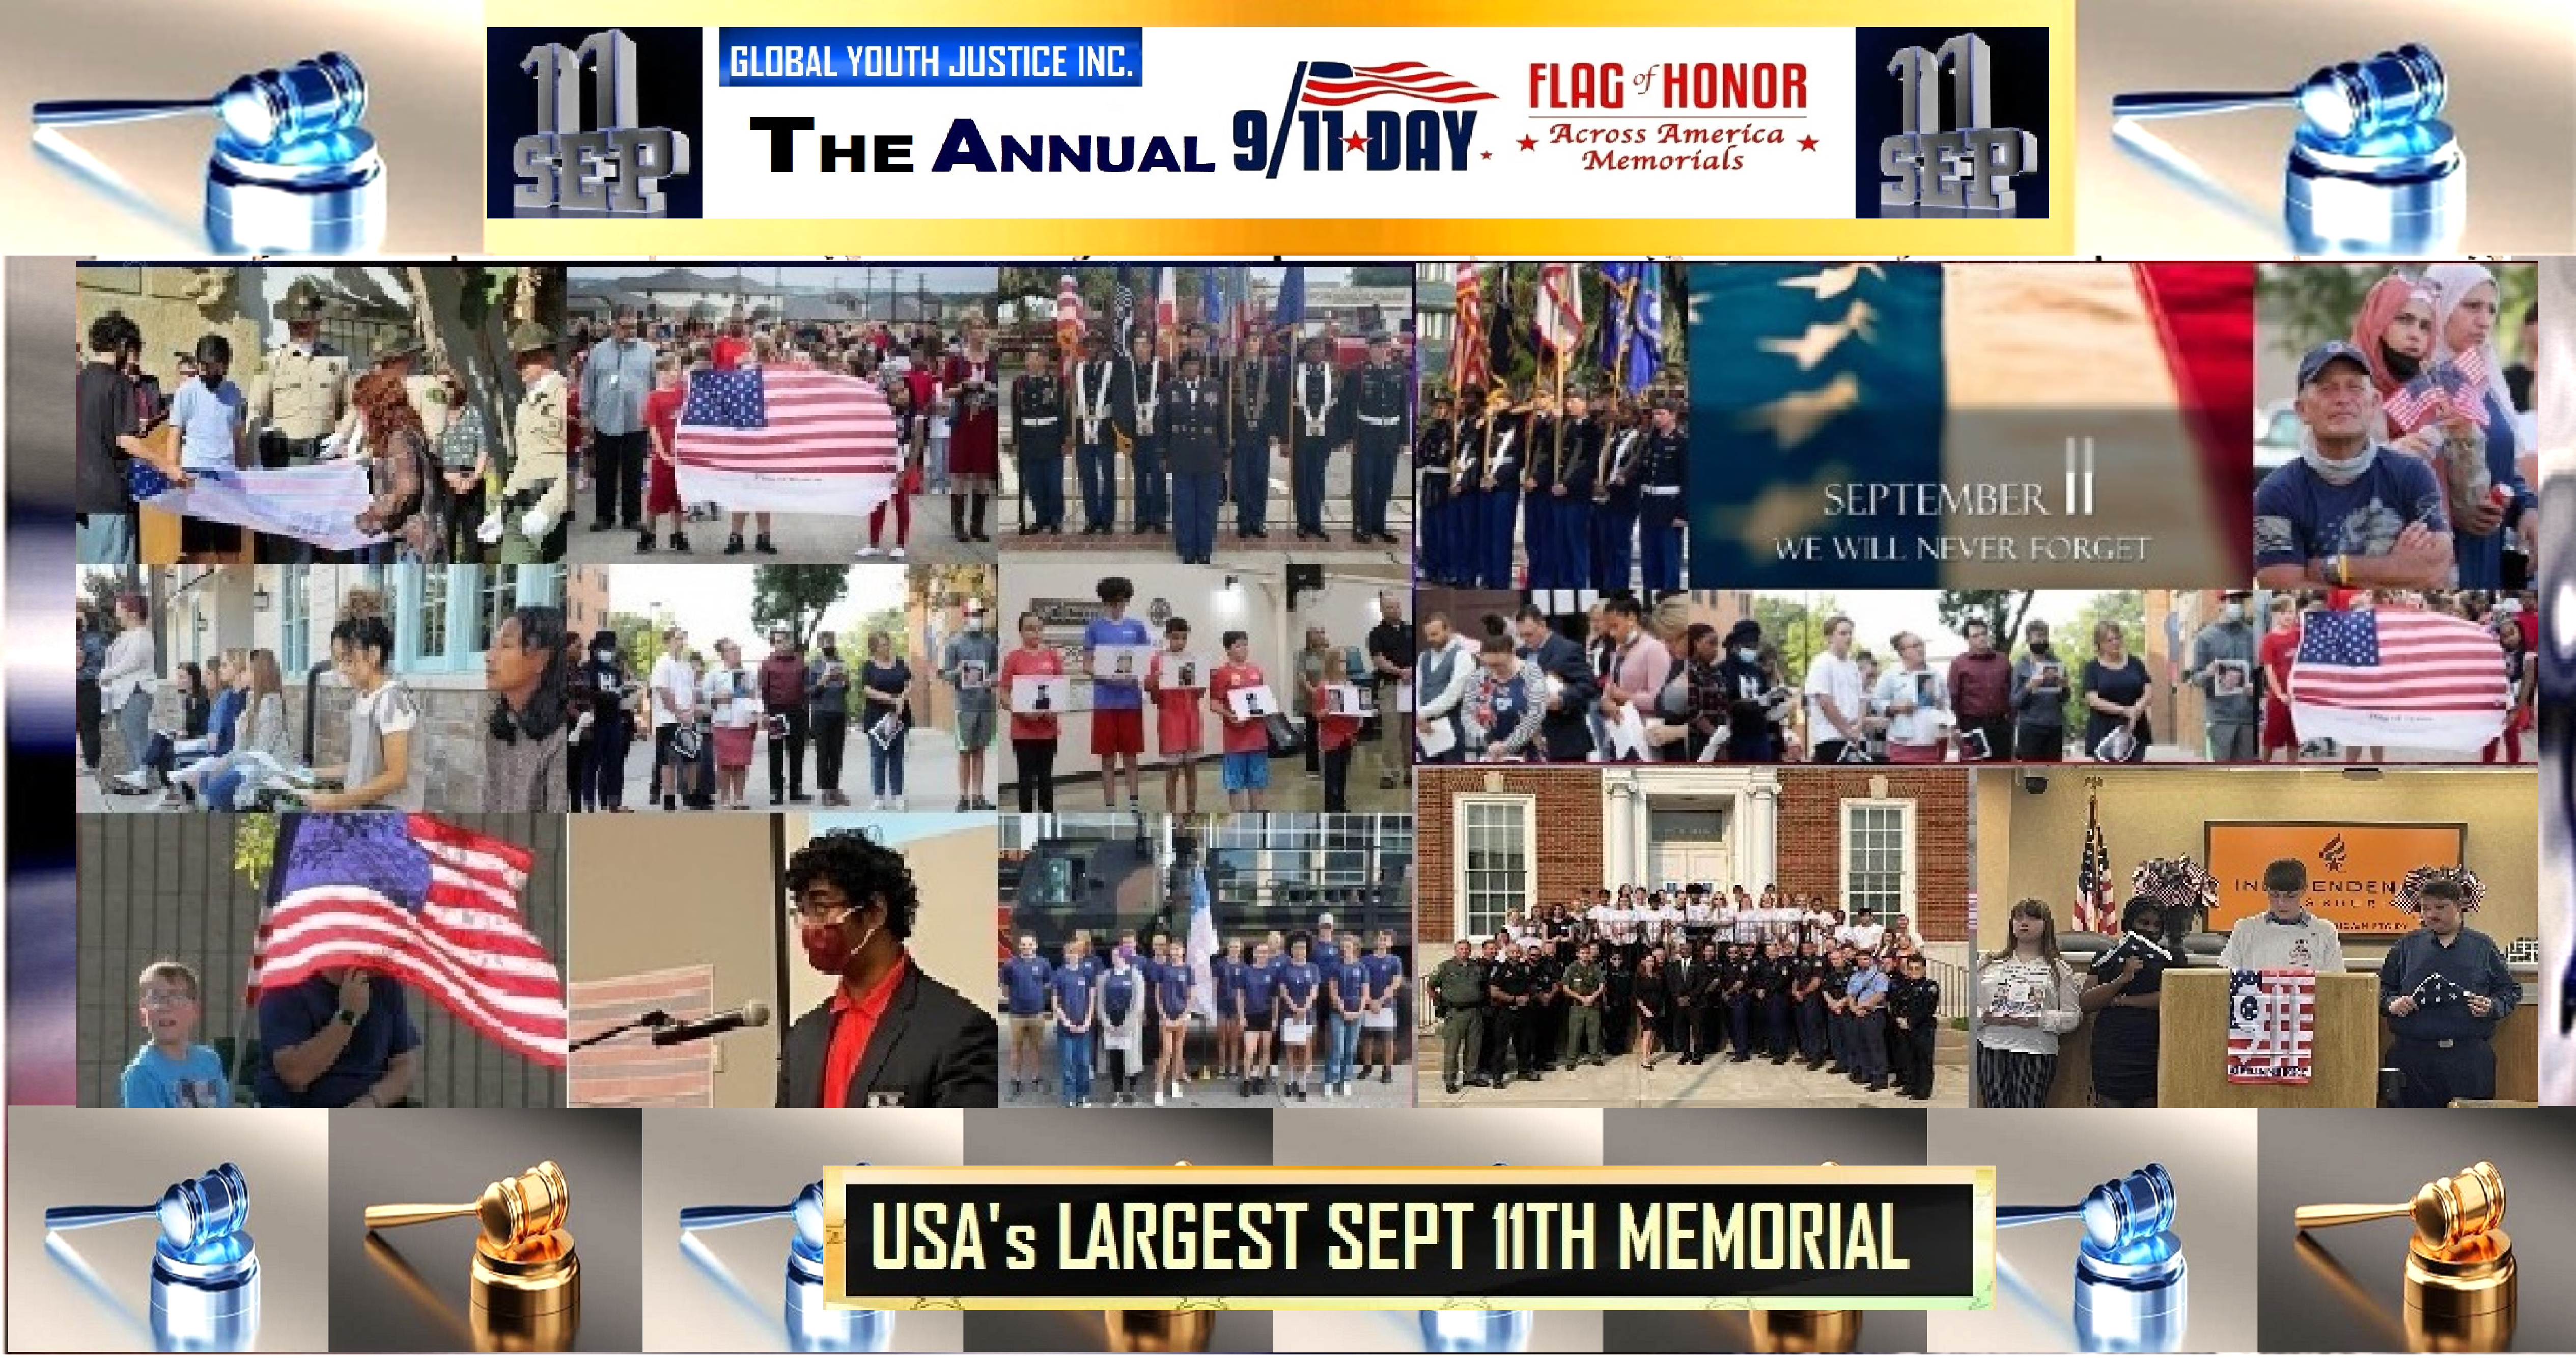 September 11th Annual 9/11 Patriot Day Flag of Honor Across America Memorials in 2024 Led by Global Youth Justice, inc. NEVER FORGET